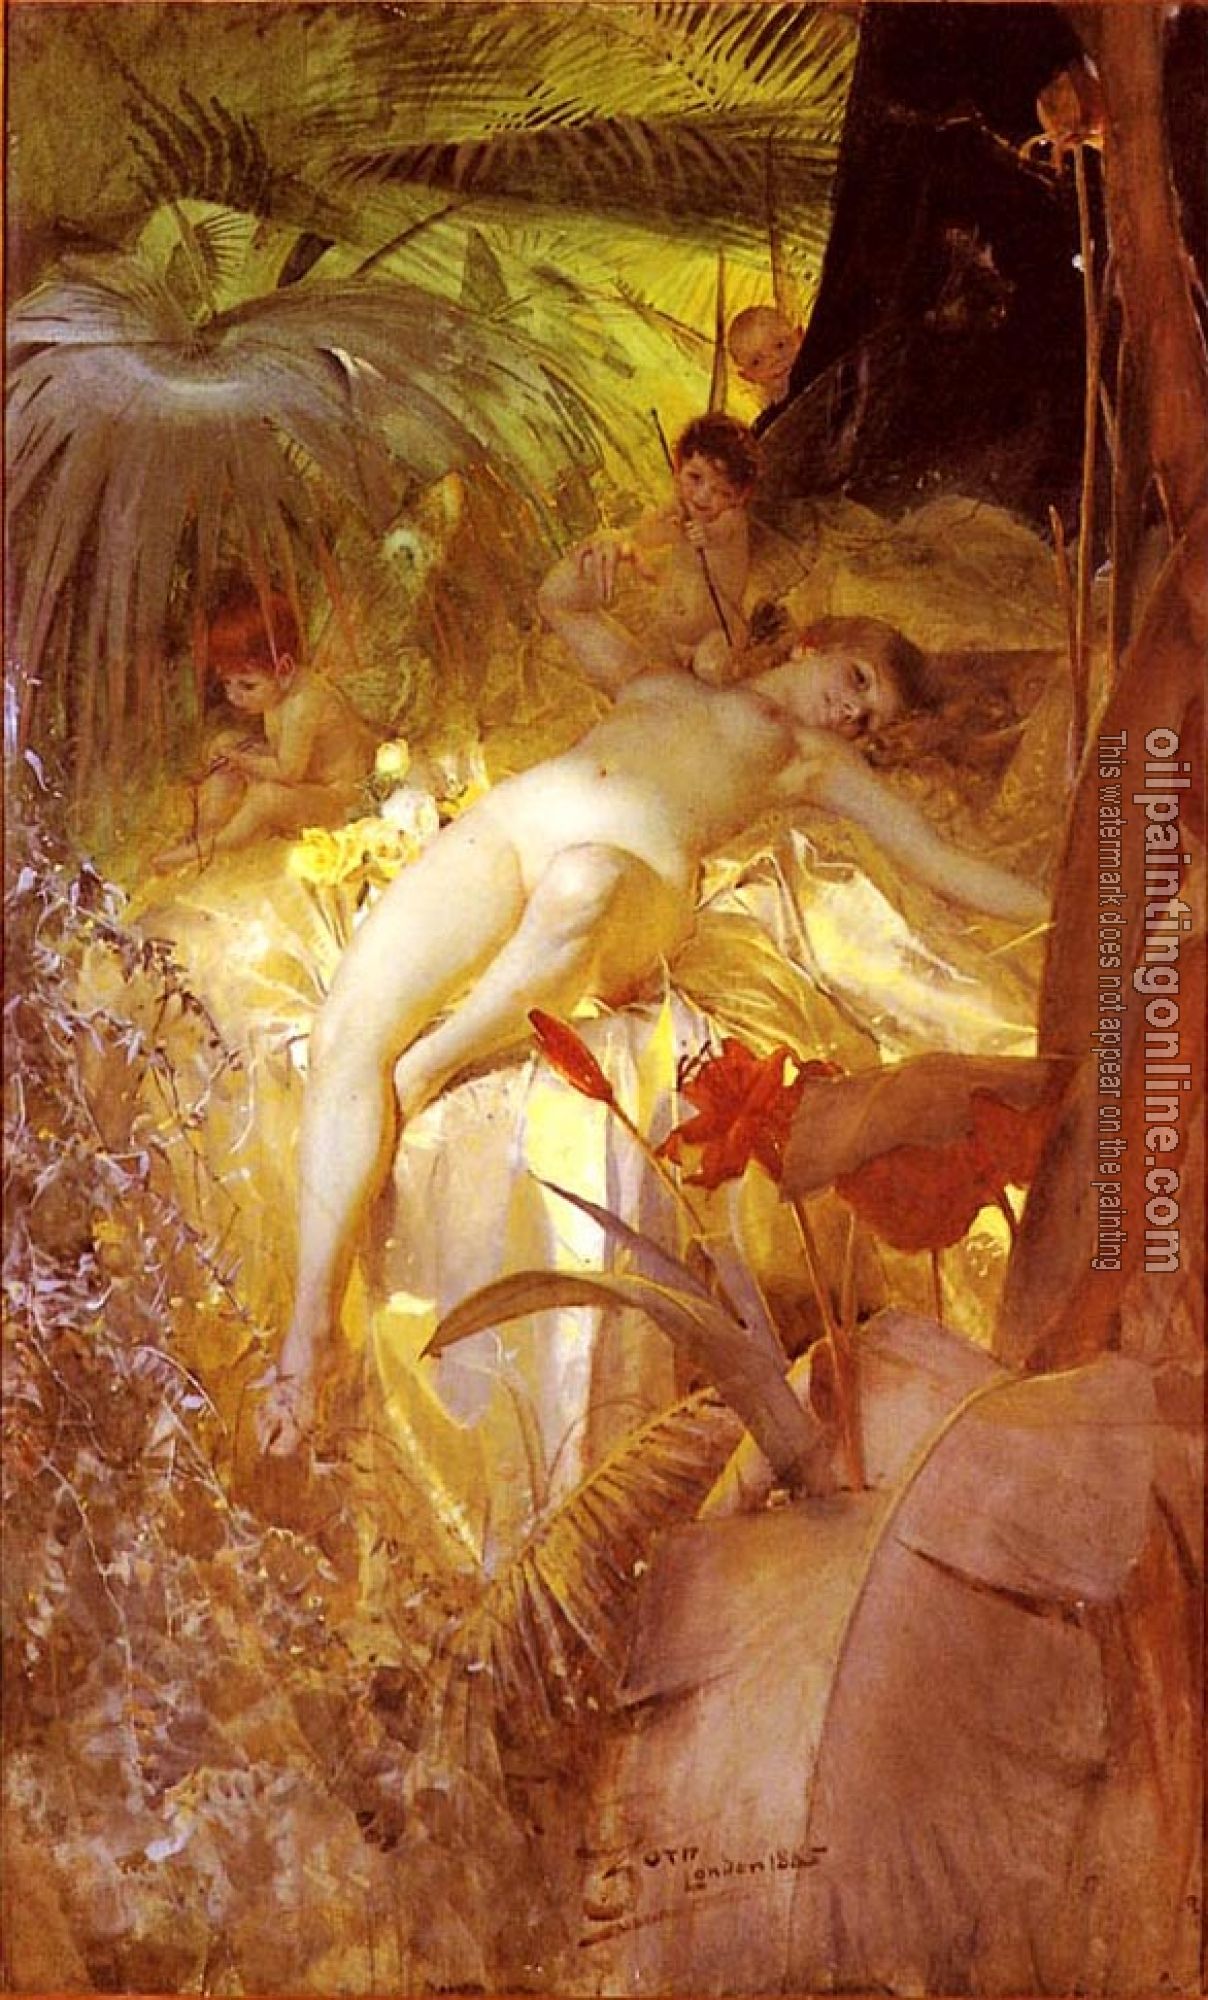 Zorn, Anders - A Love Nymph